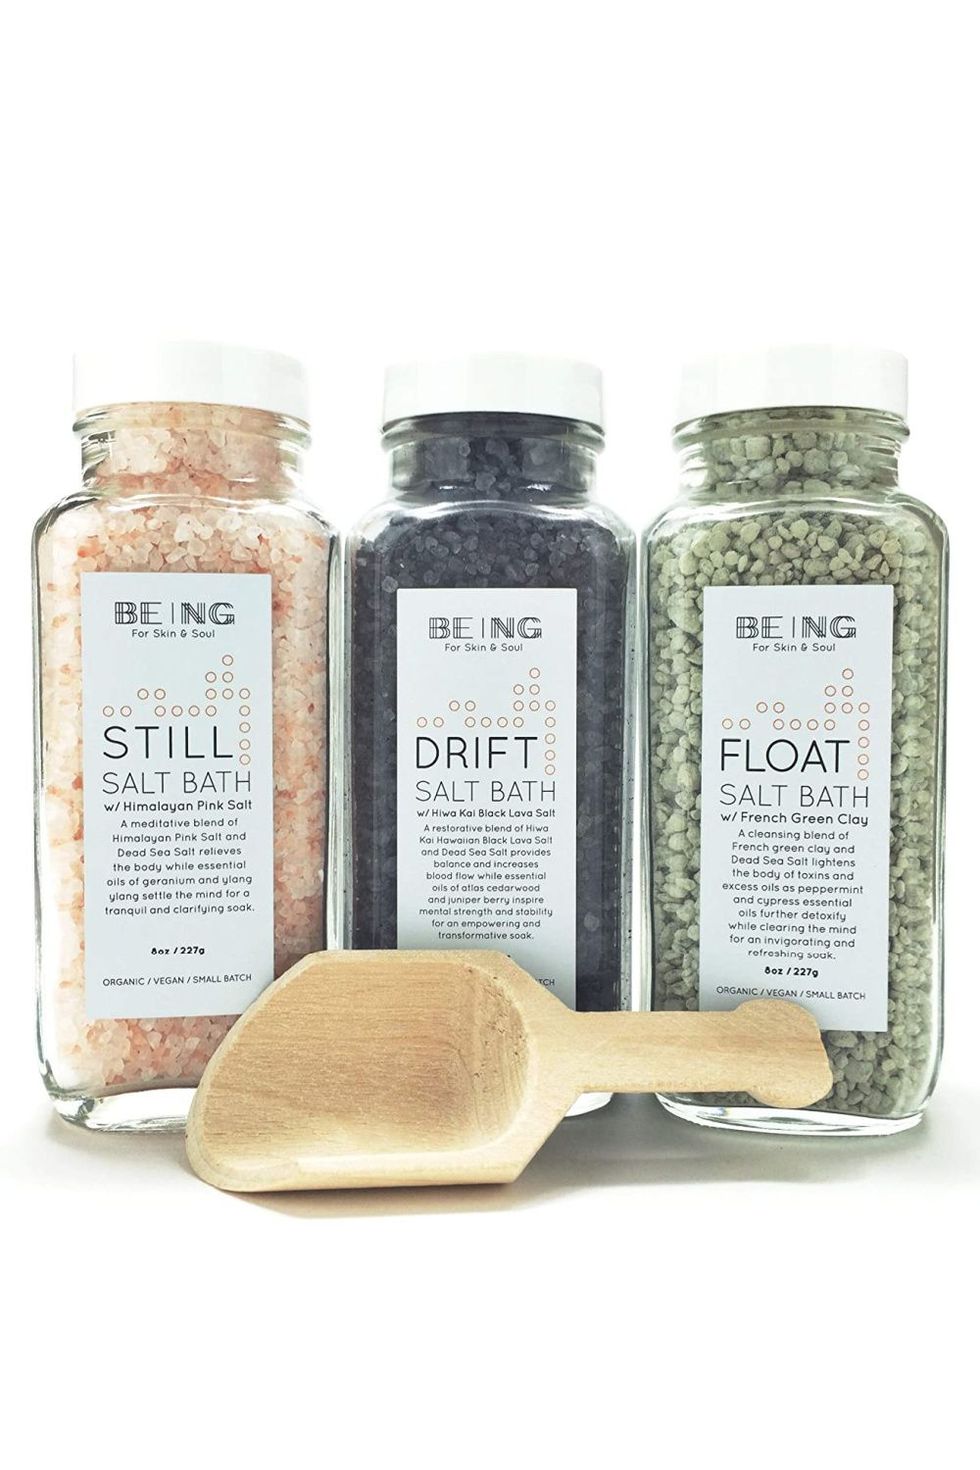 LIVE BY BEING Bath Salt Spa Gift Set Collection